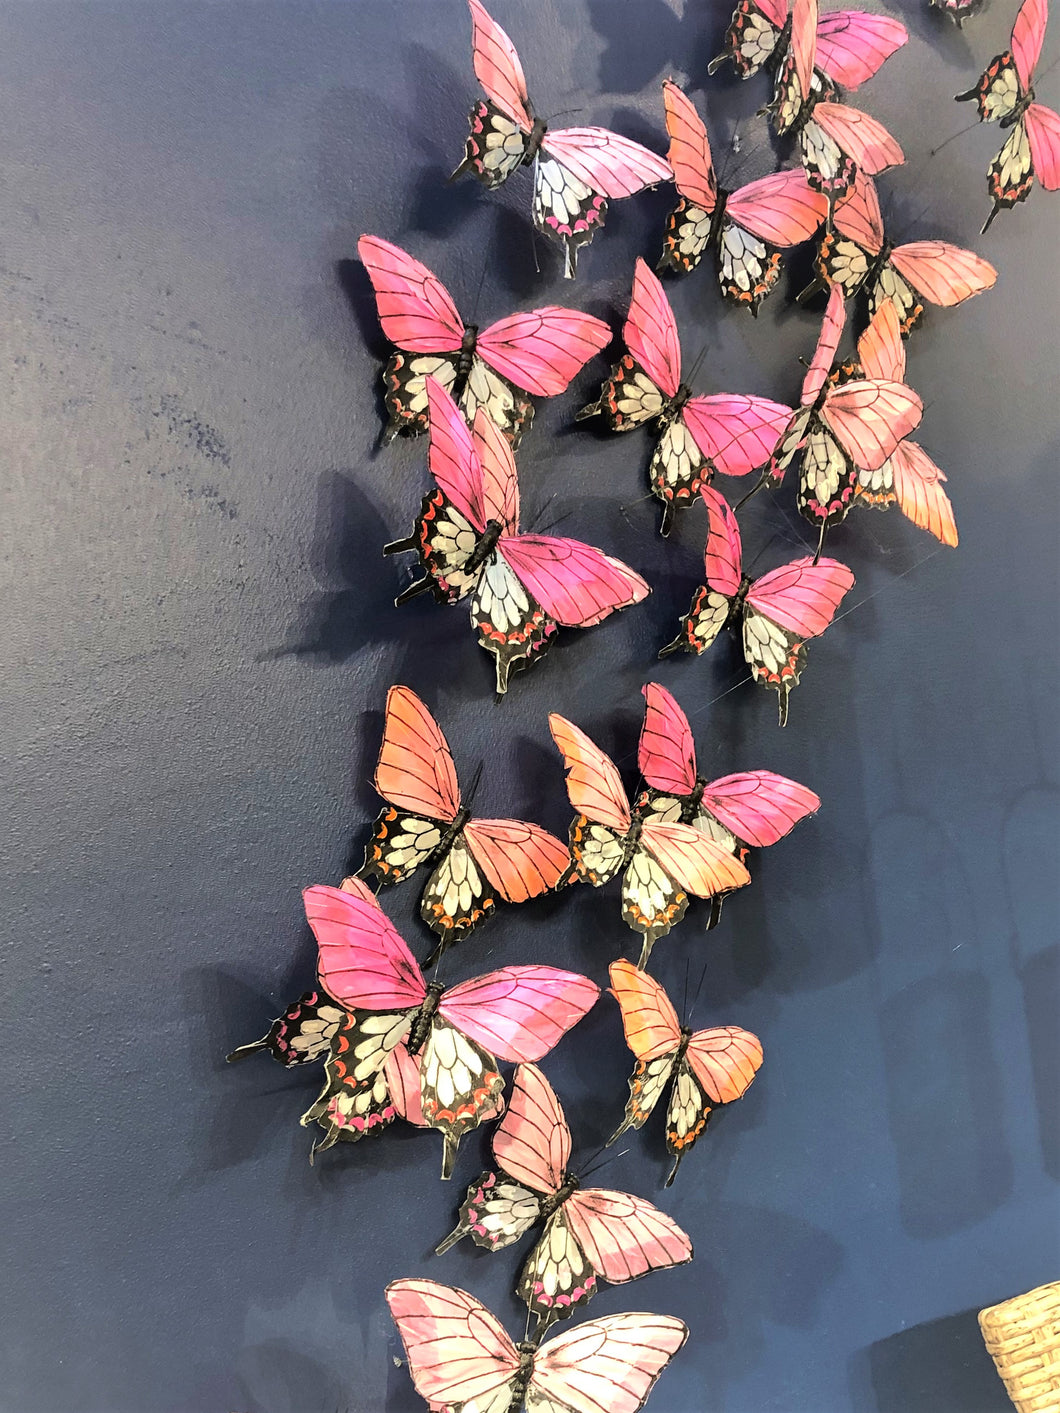 19 BUTTERFLY PICKS ON A DARK SURFACE MADE WITH FEATHERS. THEIR COLORS ARE ORANGE, BLUE, TAUPE, MAGENTA, PURPLE, AND GREEN. THEY ARE 4.5 INCHES HIGH BY 7 INCHES WIDE BY 1” DEEP AND COME WITH A 10” HIGH WIRE PICK.